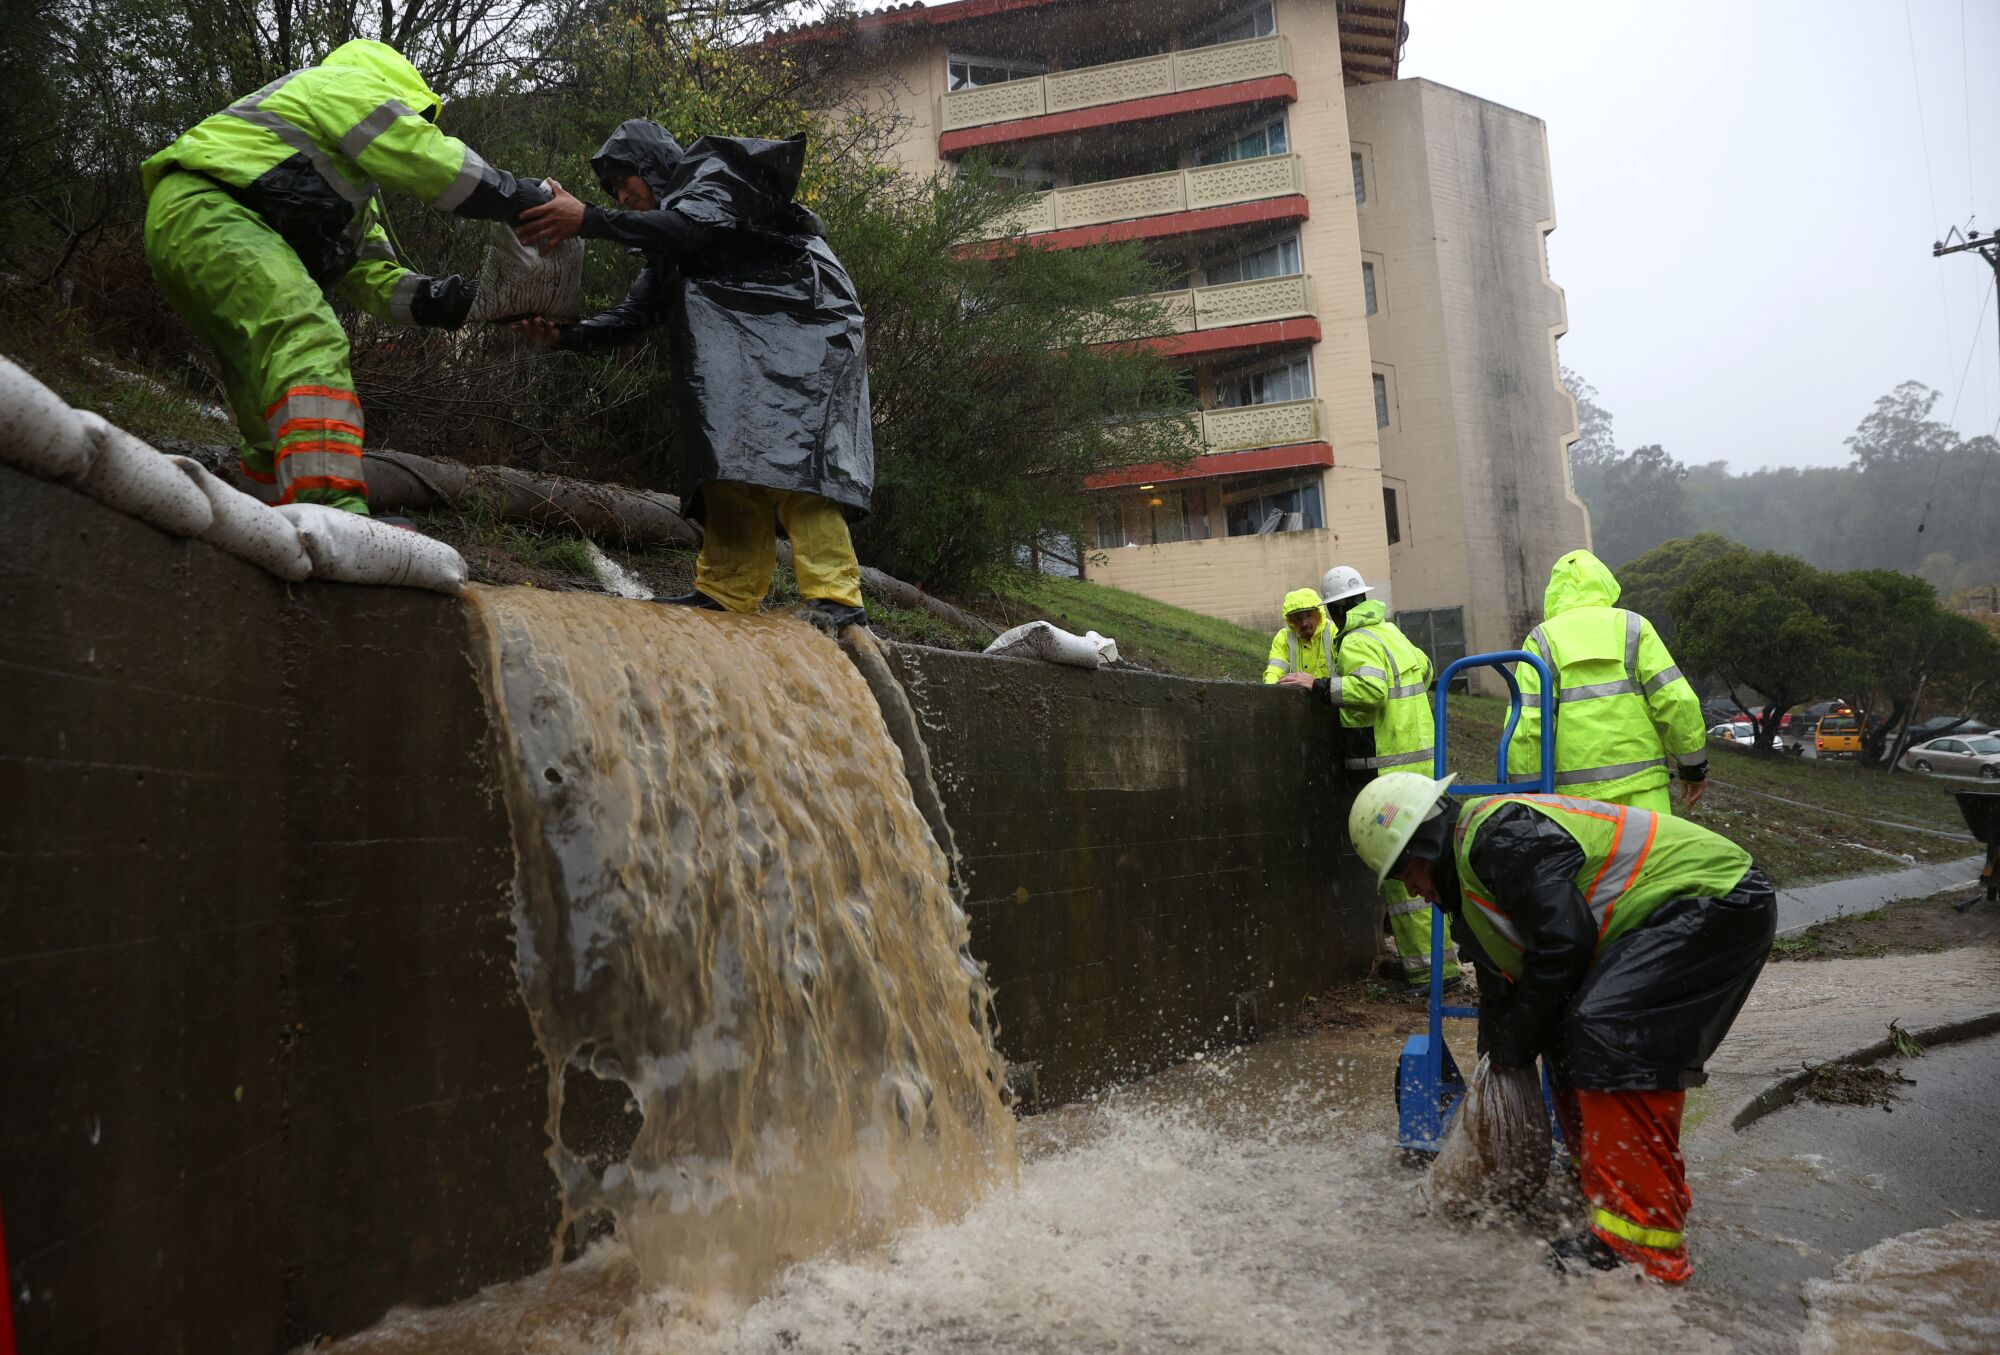 Workers try to divert water into drains as rain pours down Sunday in Marin City, Calif.